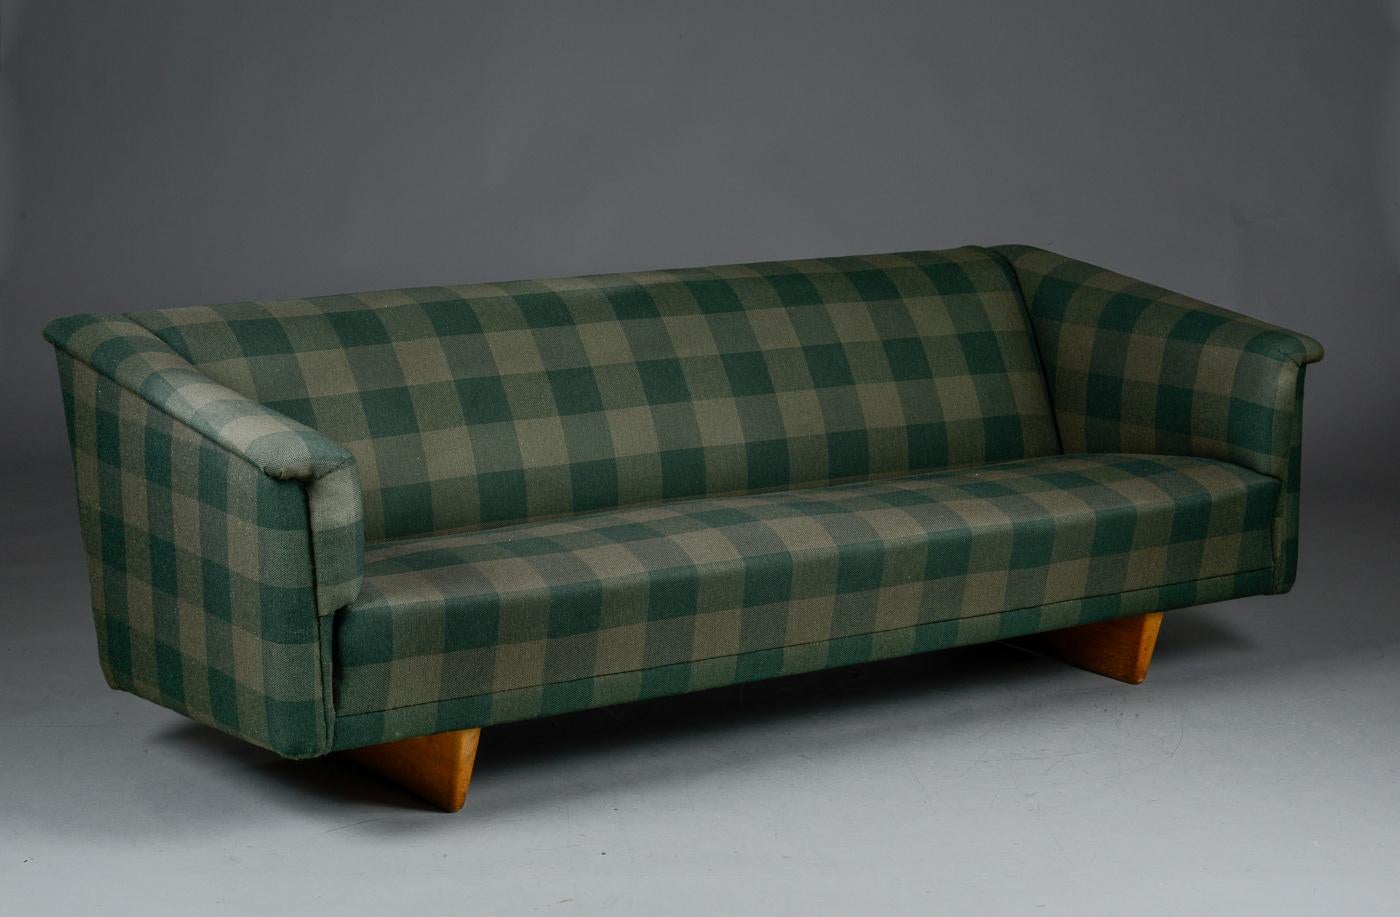 An Early Børge Mogensen (1914-1972) sofa, model 4853, upholstered in wool fabric, solid oak legs. Designed in 1953. Produced by Tage Kristensen L. 210 cm. Traces of wear.